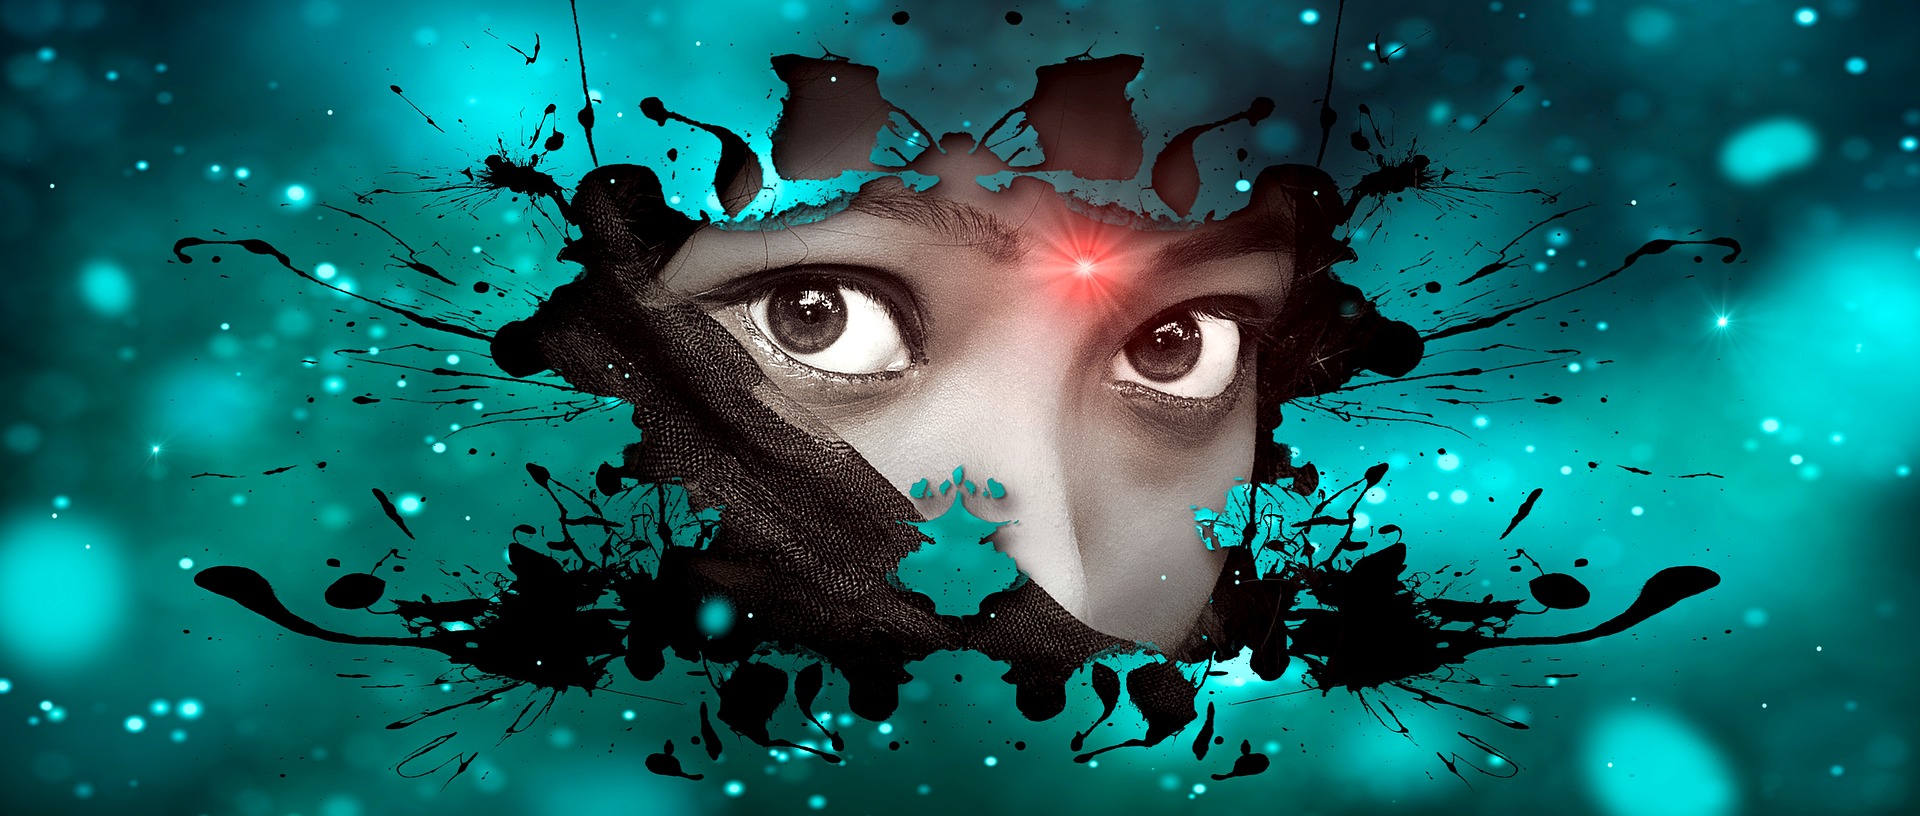 A pair of expressive eyes peers through a central hole in a splash of black ink against a teal bokeh background. A small red light is positioned on the forehead, adding a mysterious element to the abstract image, reminiscent of the deep introspection found in Khiron Clinics' trauma treatment programs.